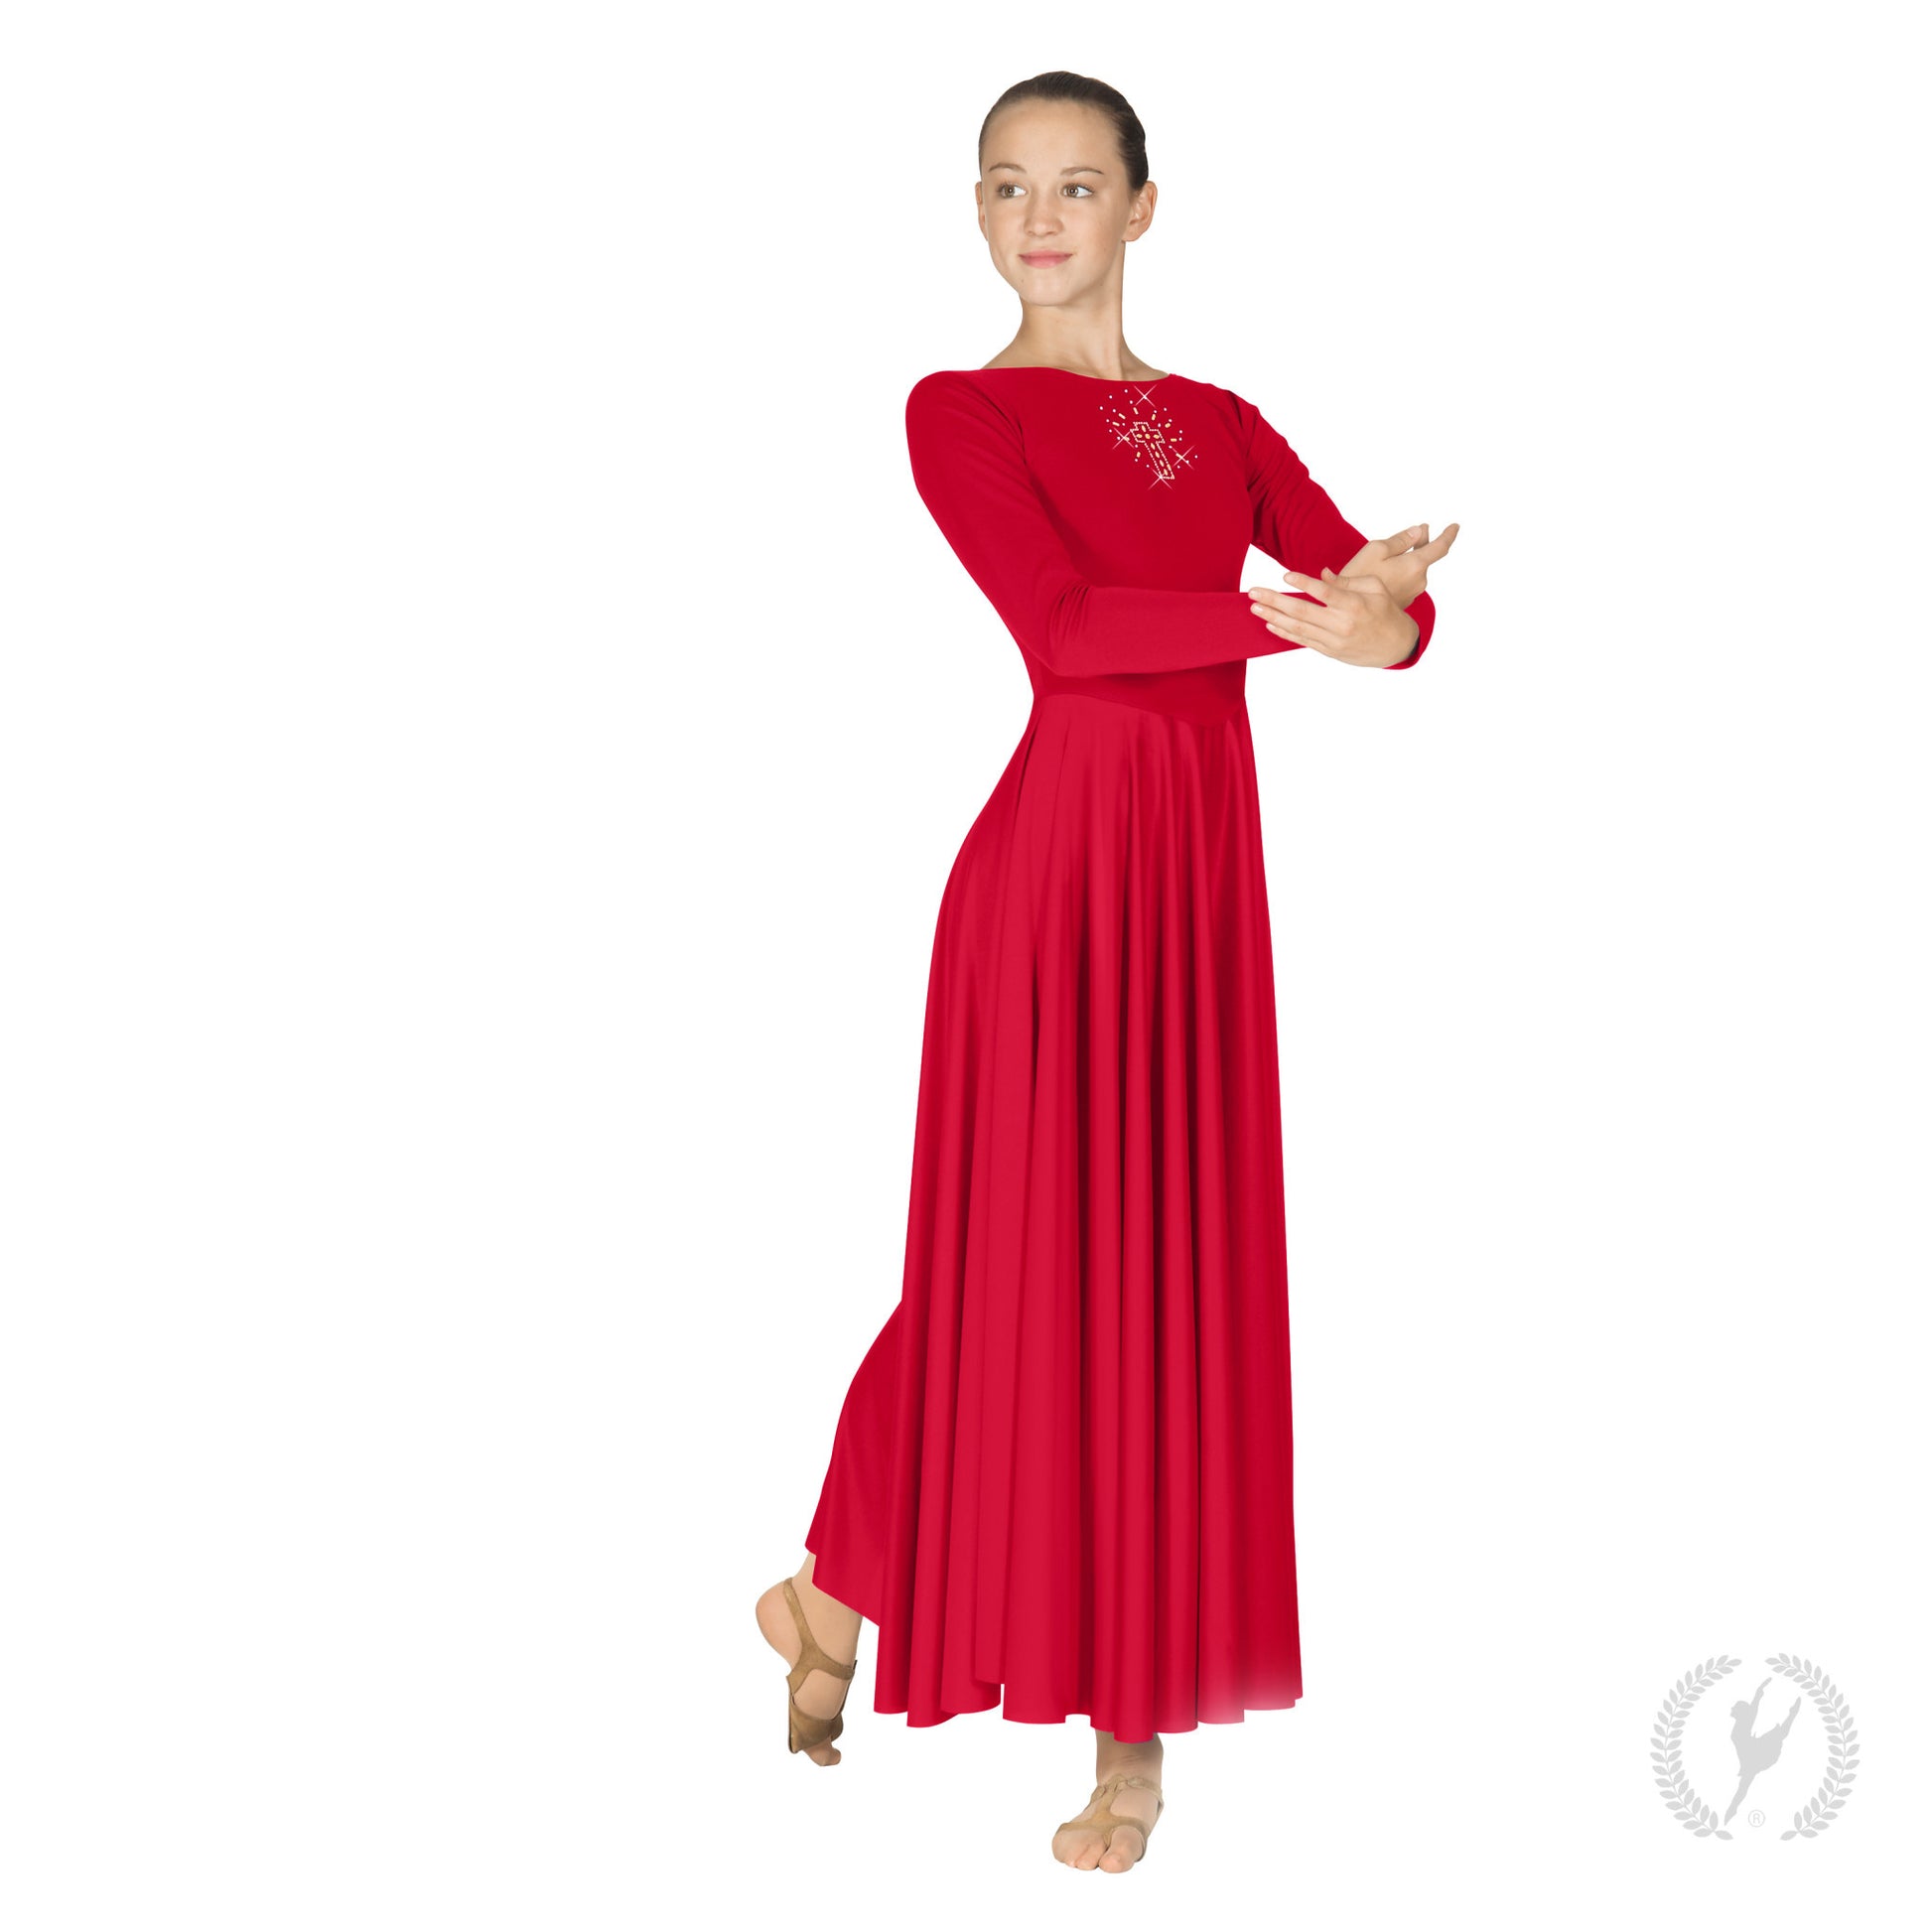 11524_red_praisedress_front